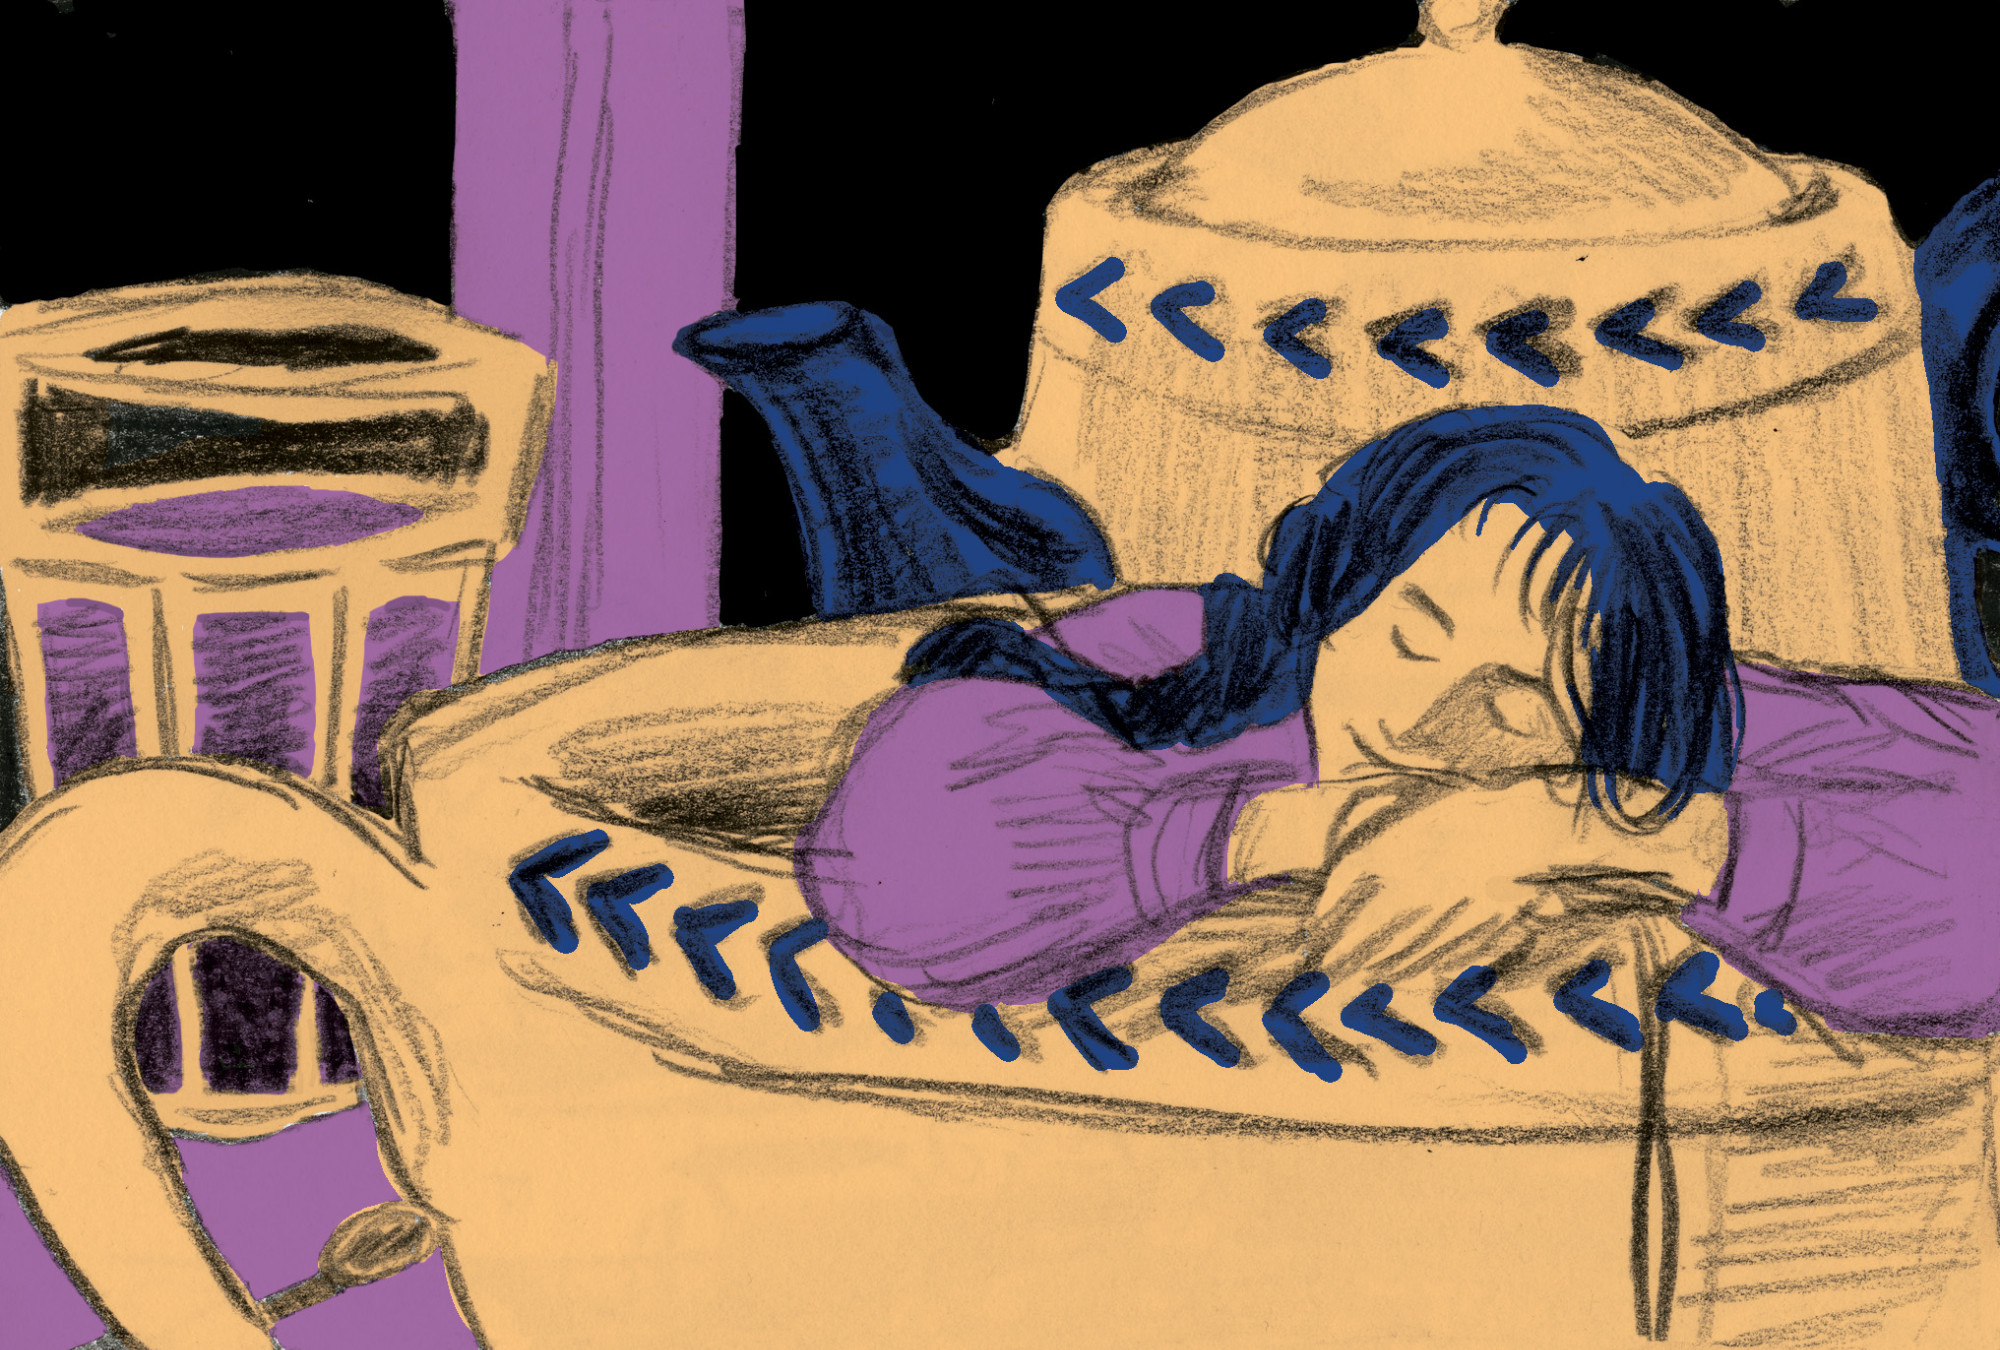 Editorial illustration 2. Based on an article about sleep remedies.